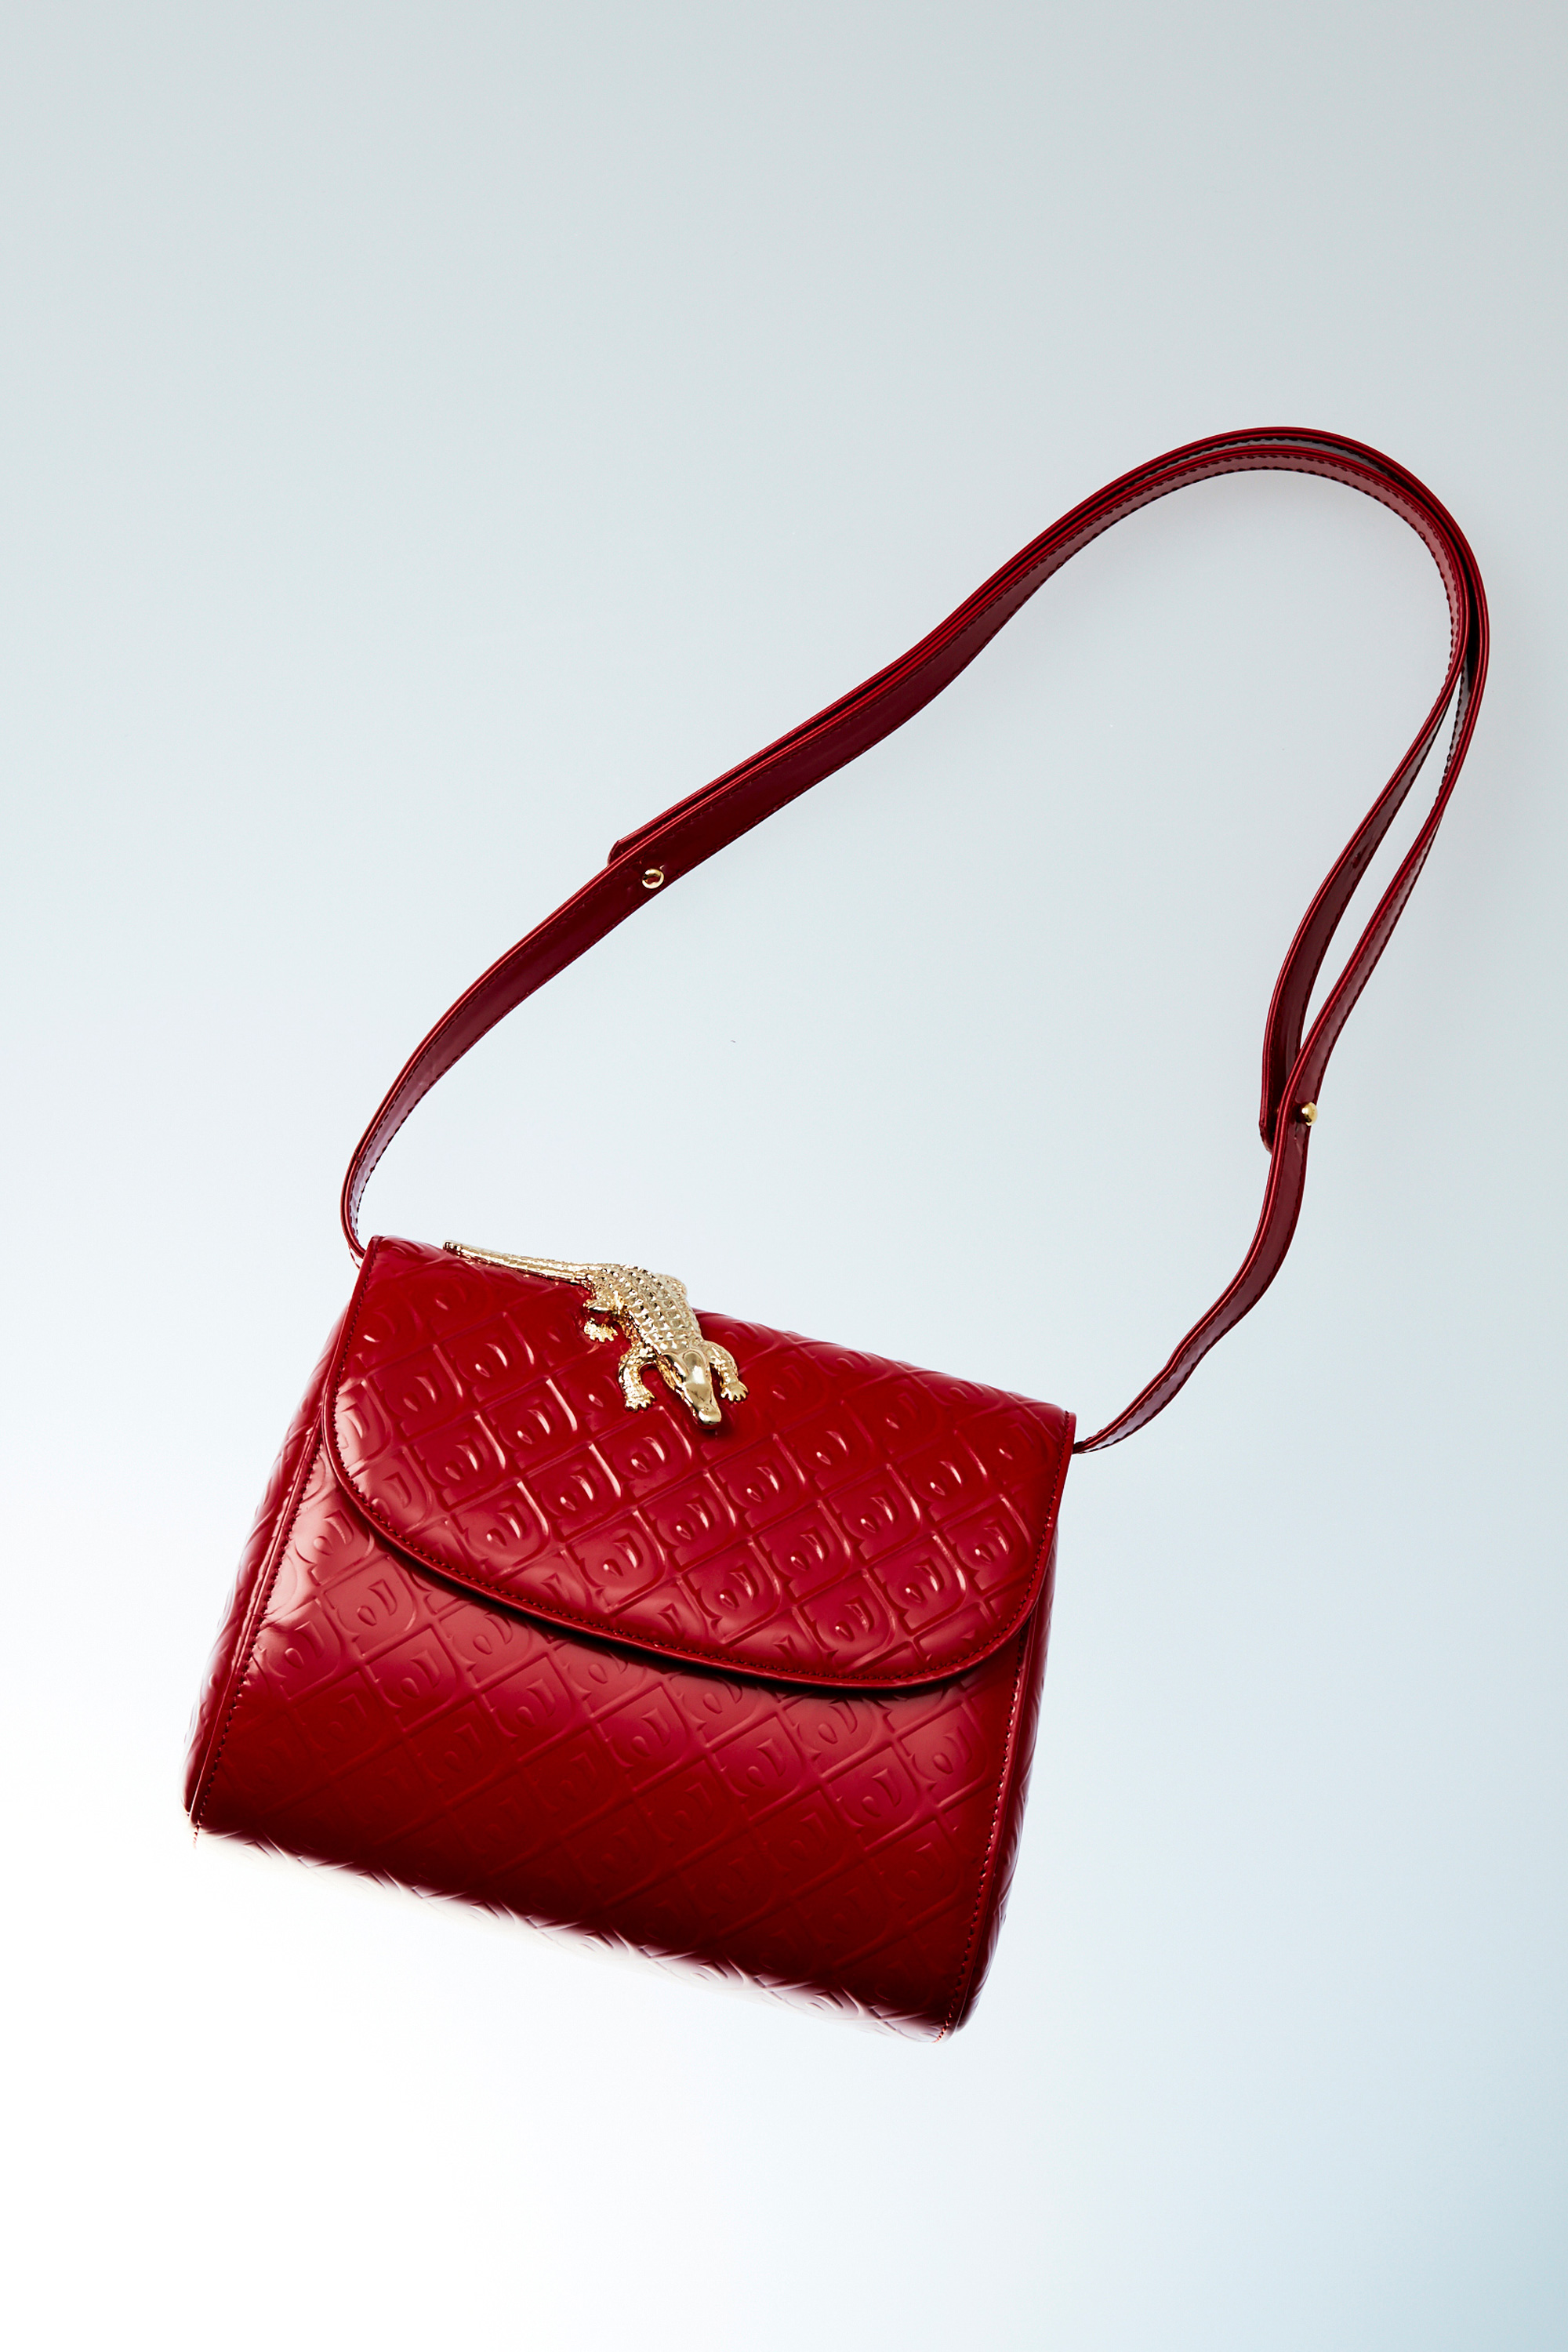 Metallic Crocodile Embossed Square Bag With Coin Purse for Women